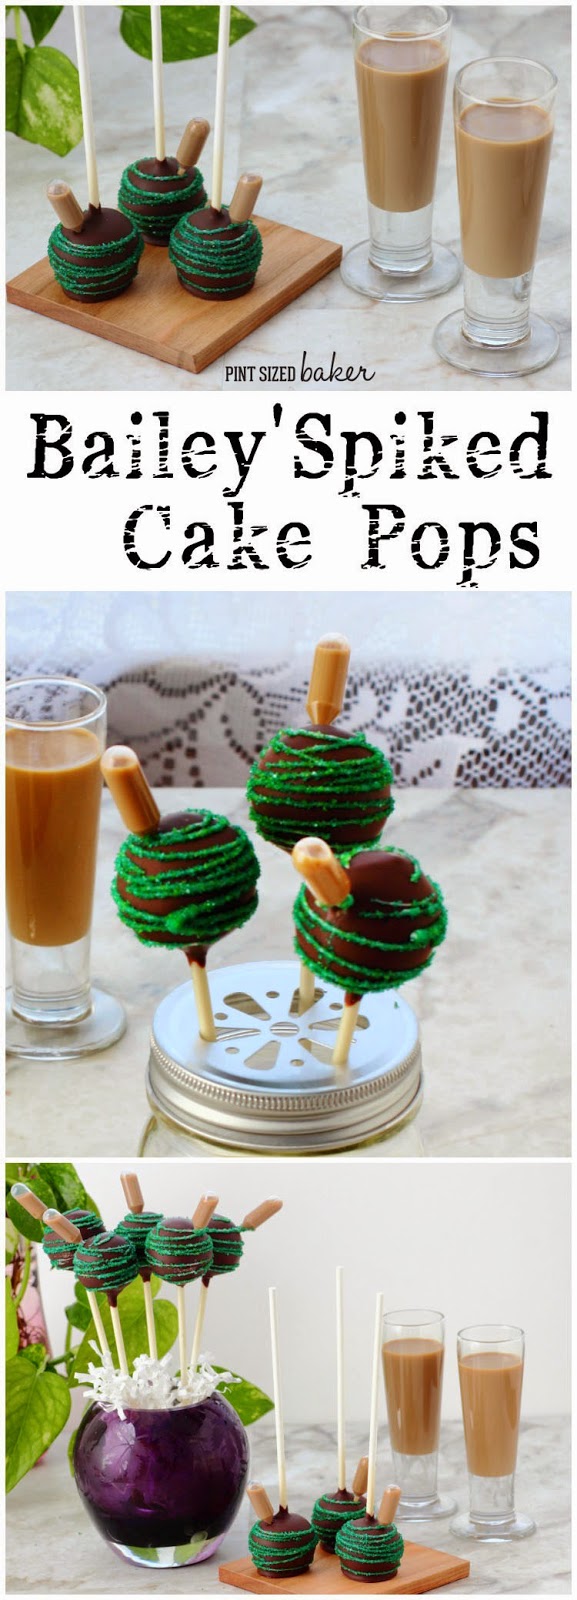 Bailey’s Spiked Cake Pops